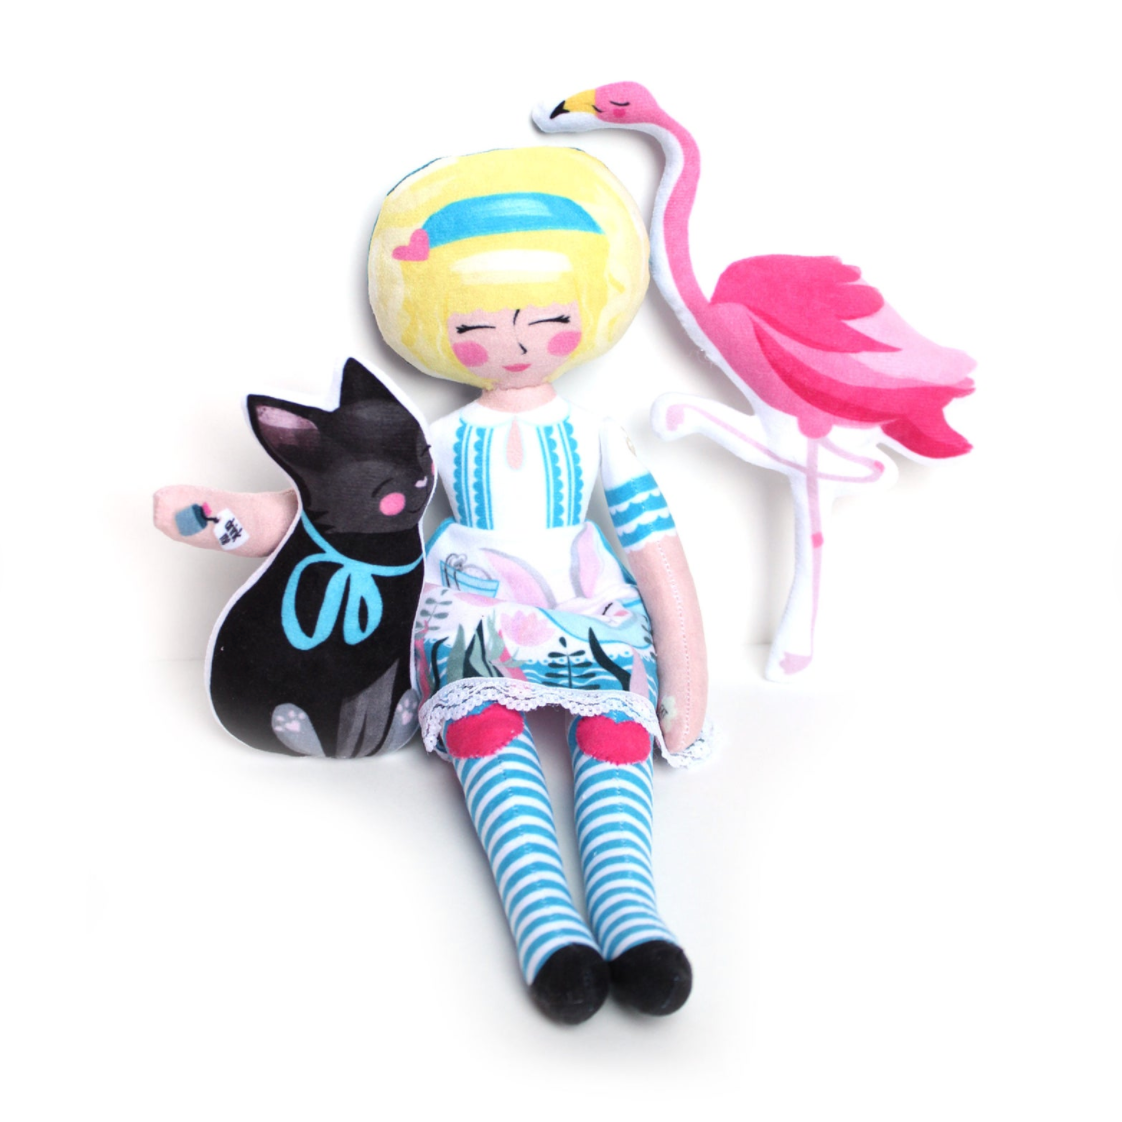 DIY - Alice, Dinah and the Flamingo (and the cheshire cat!)